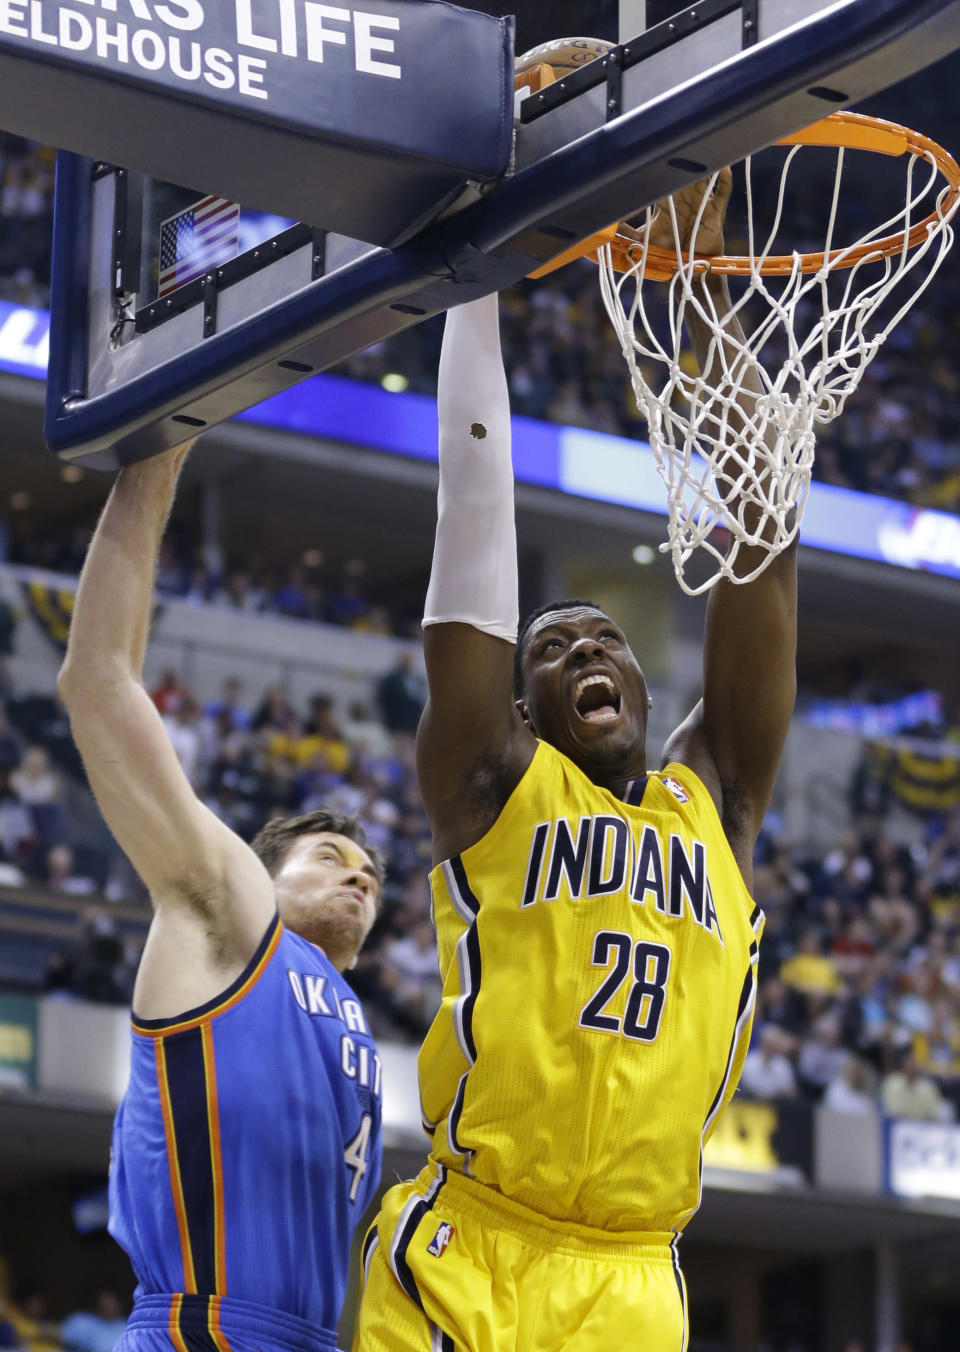 Indiana Pacers center Ian Mahinmi (28) gets a basket on a dunk in front of Oklahoma City Thunder forward Nick Collison in the second half of an NBA basketball game in Indianapolis, Sunday, April 13, 2014. The Pacers defeated the Thunder 102-97. (AP Photo/Michael Conroy)